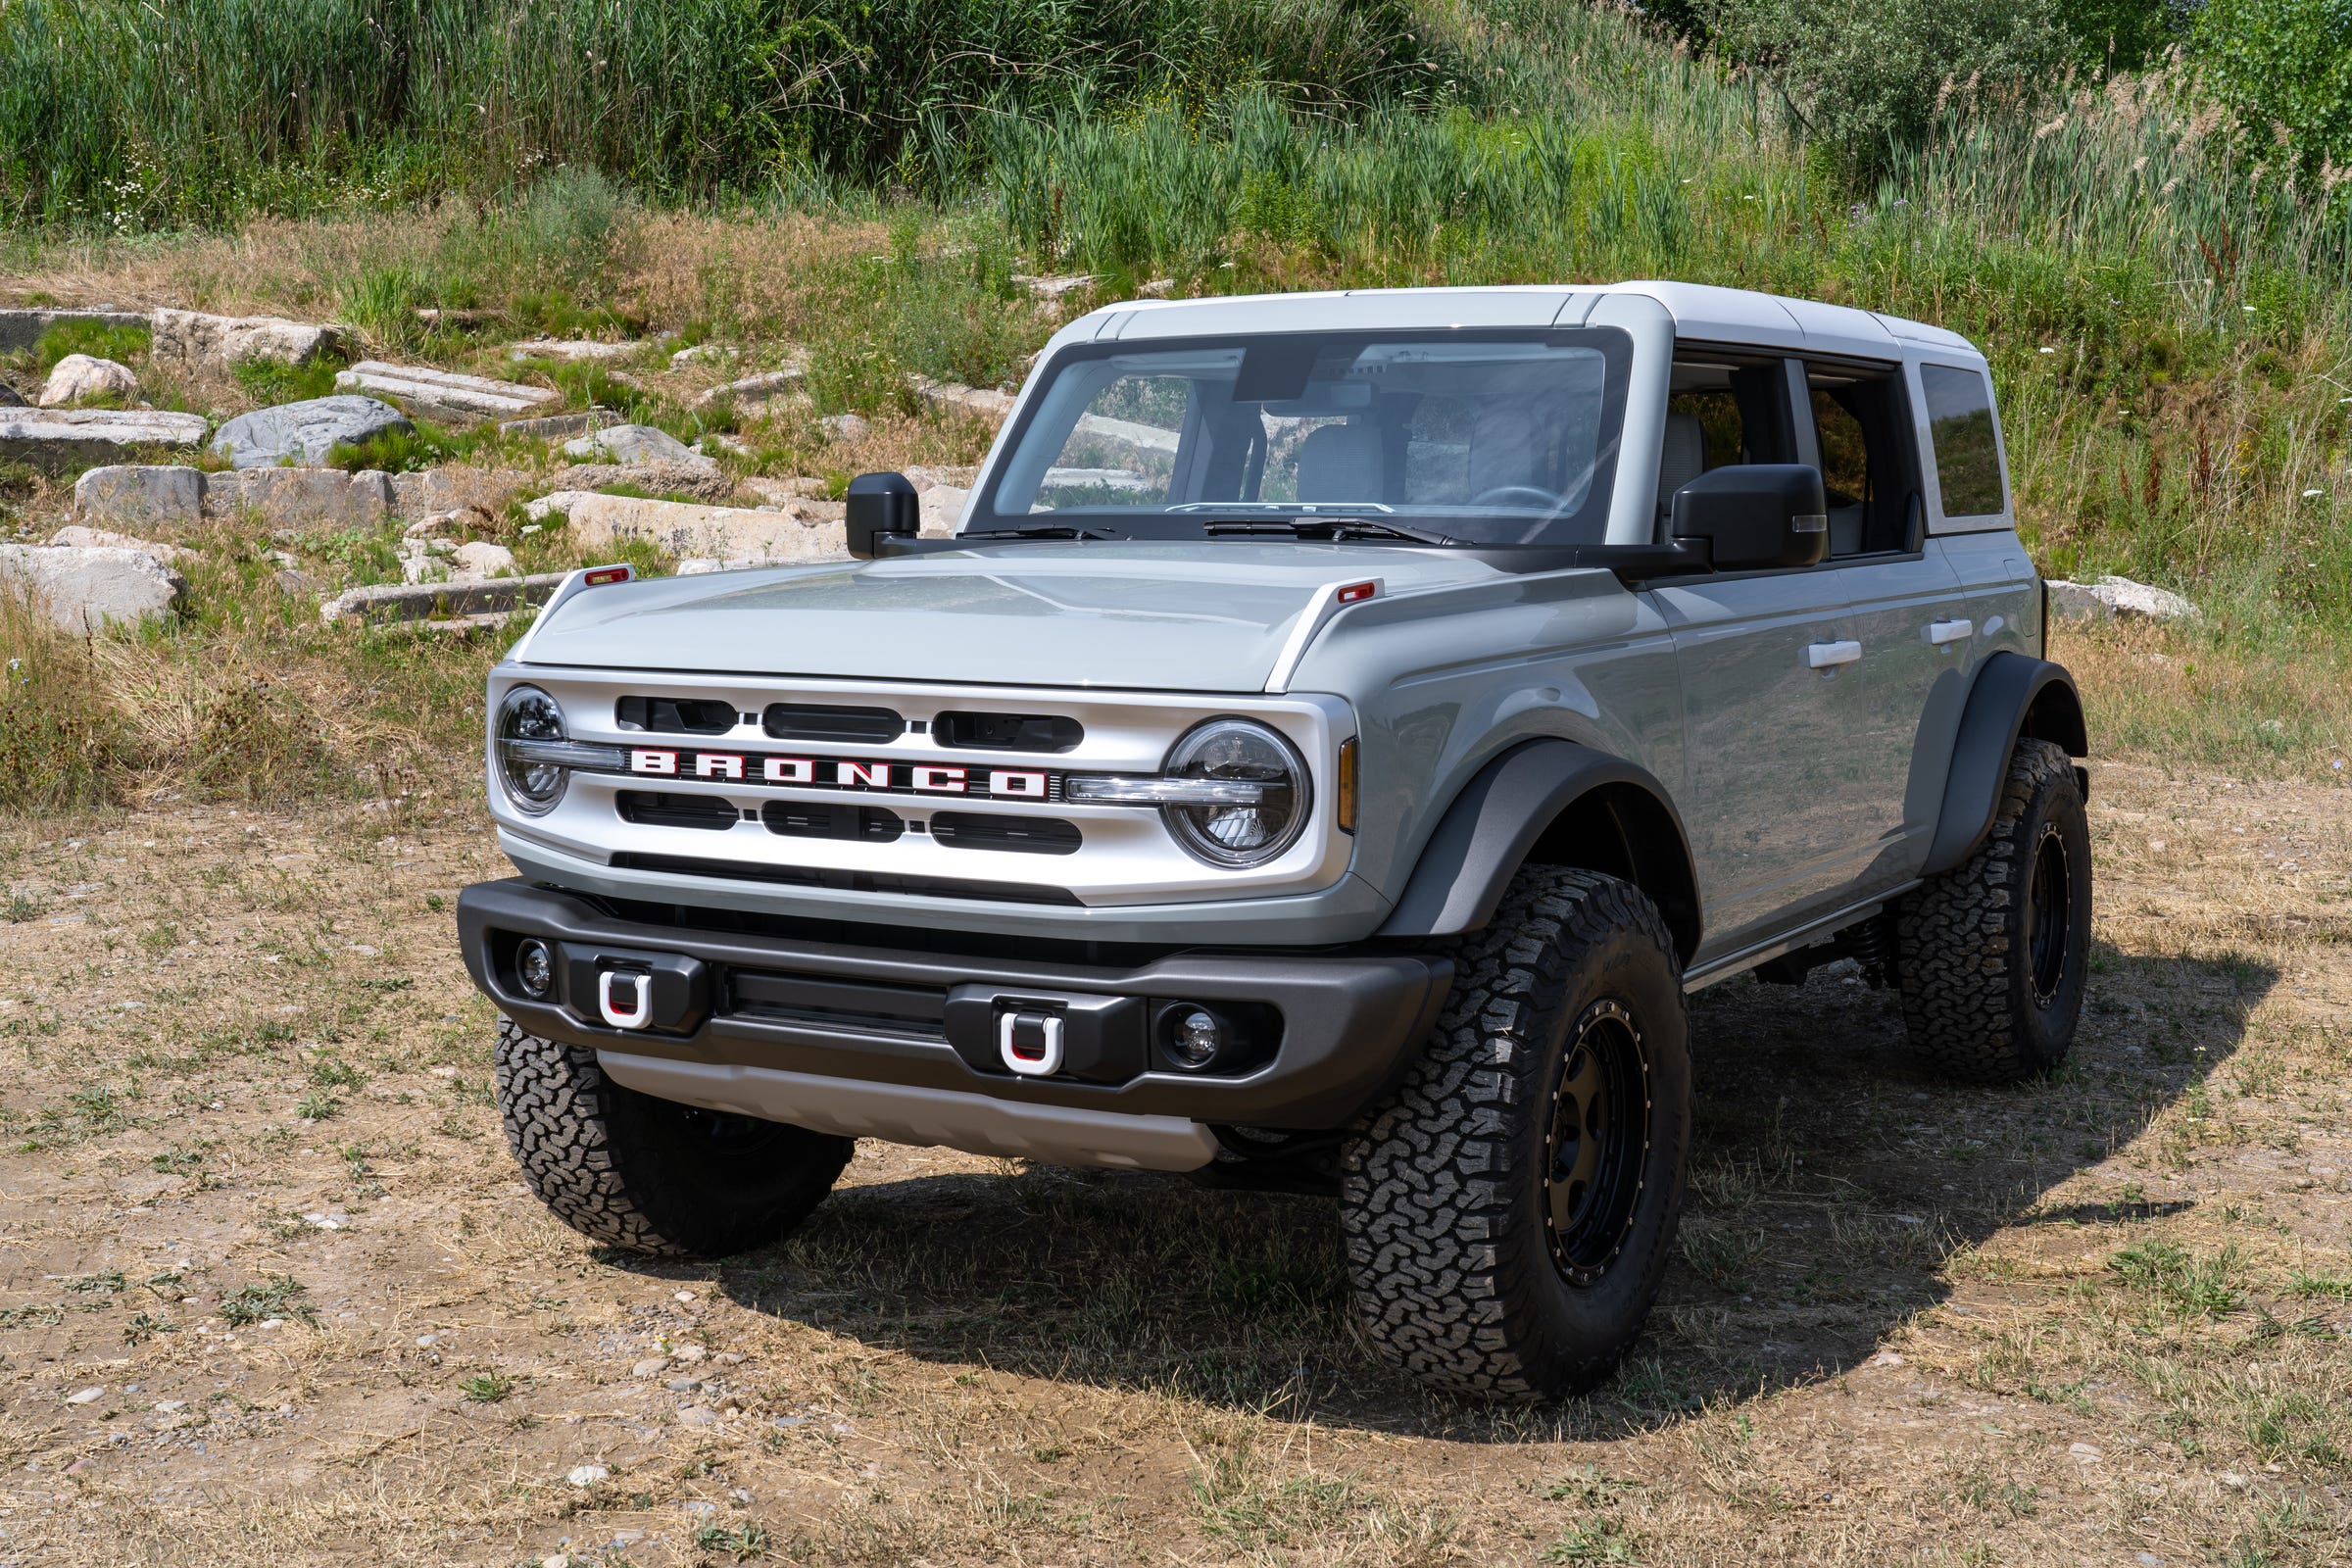 2021 Ford Bronco revealed: Revived SUV boasts features to make Jeep SUV